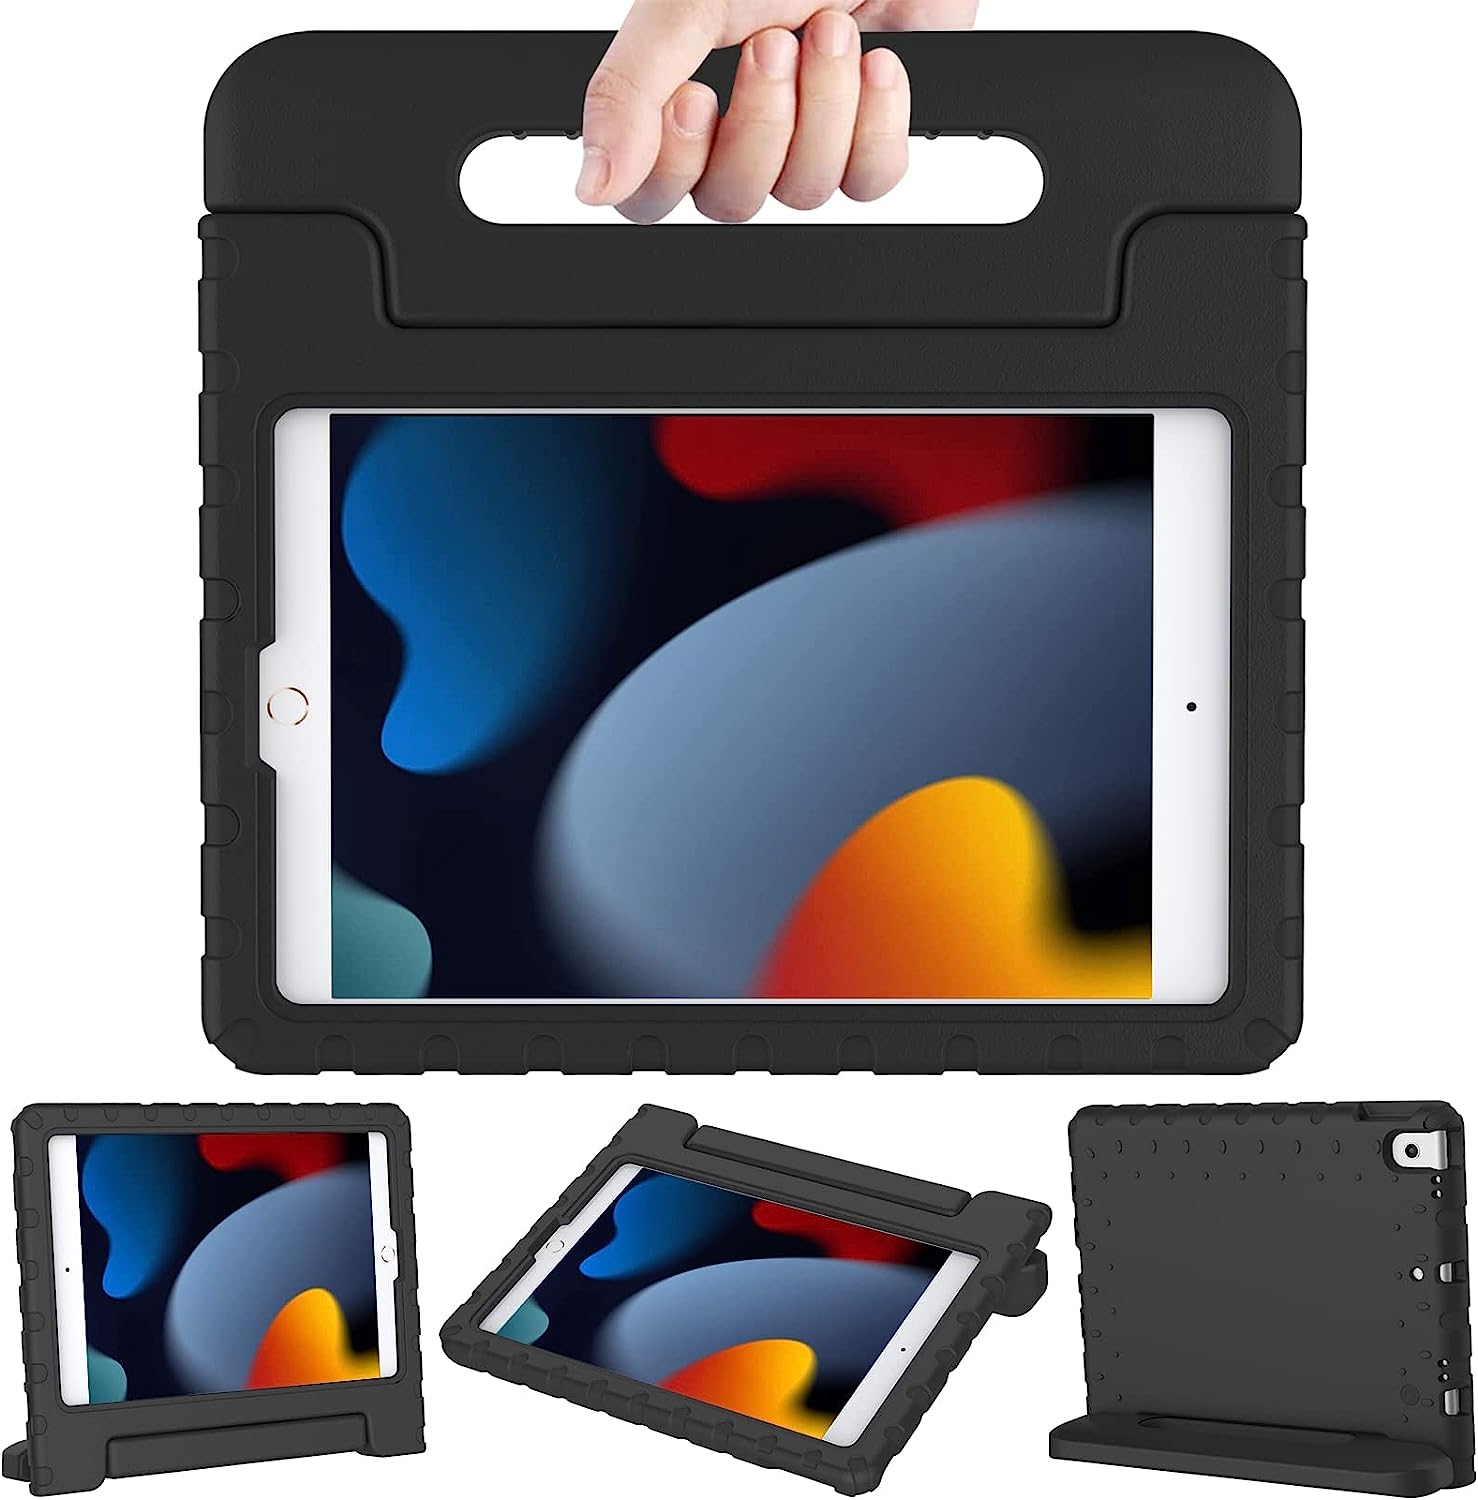 Shockproof Case w Handle & Stand for iPad 9th / 8th / 7th Gen & iPad Air 3 10.5 inch (Black) *Free Shipping*